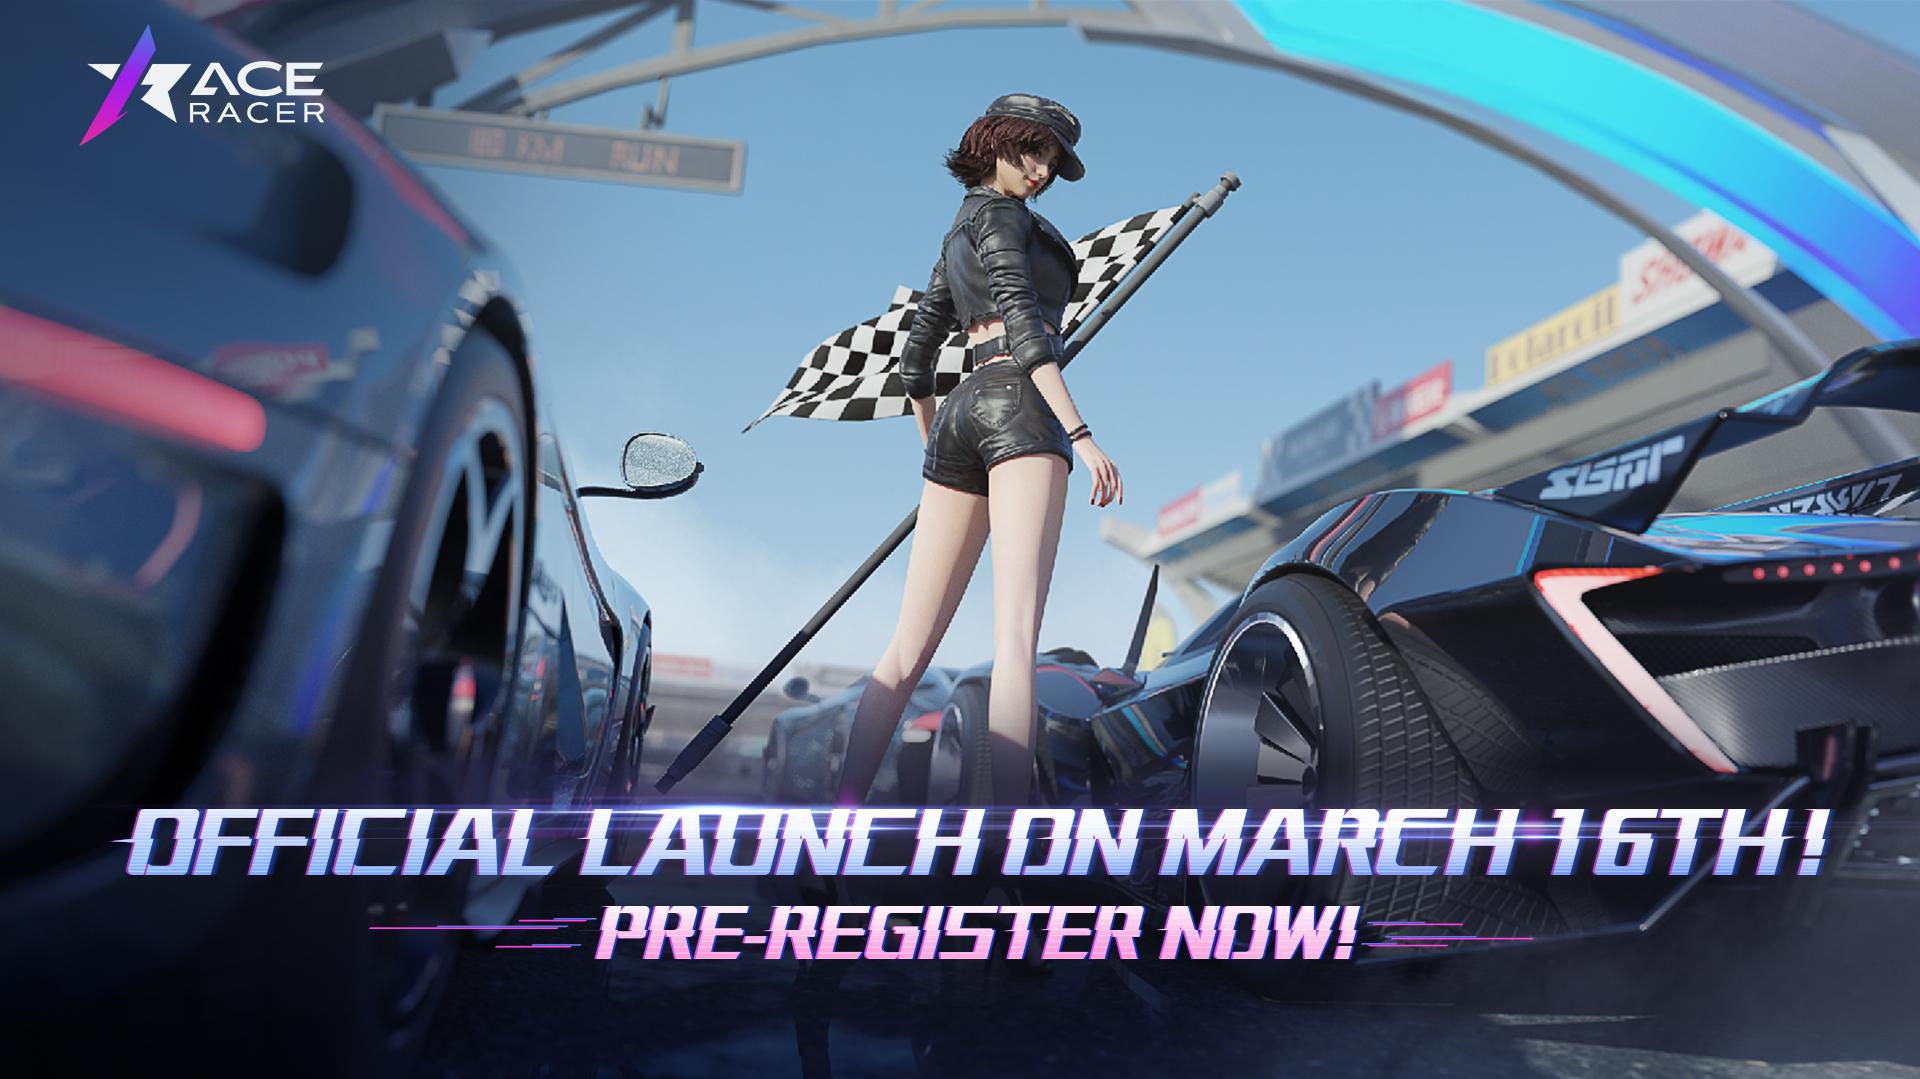 Mobile Game Ace Racer Launches Next Month